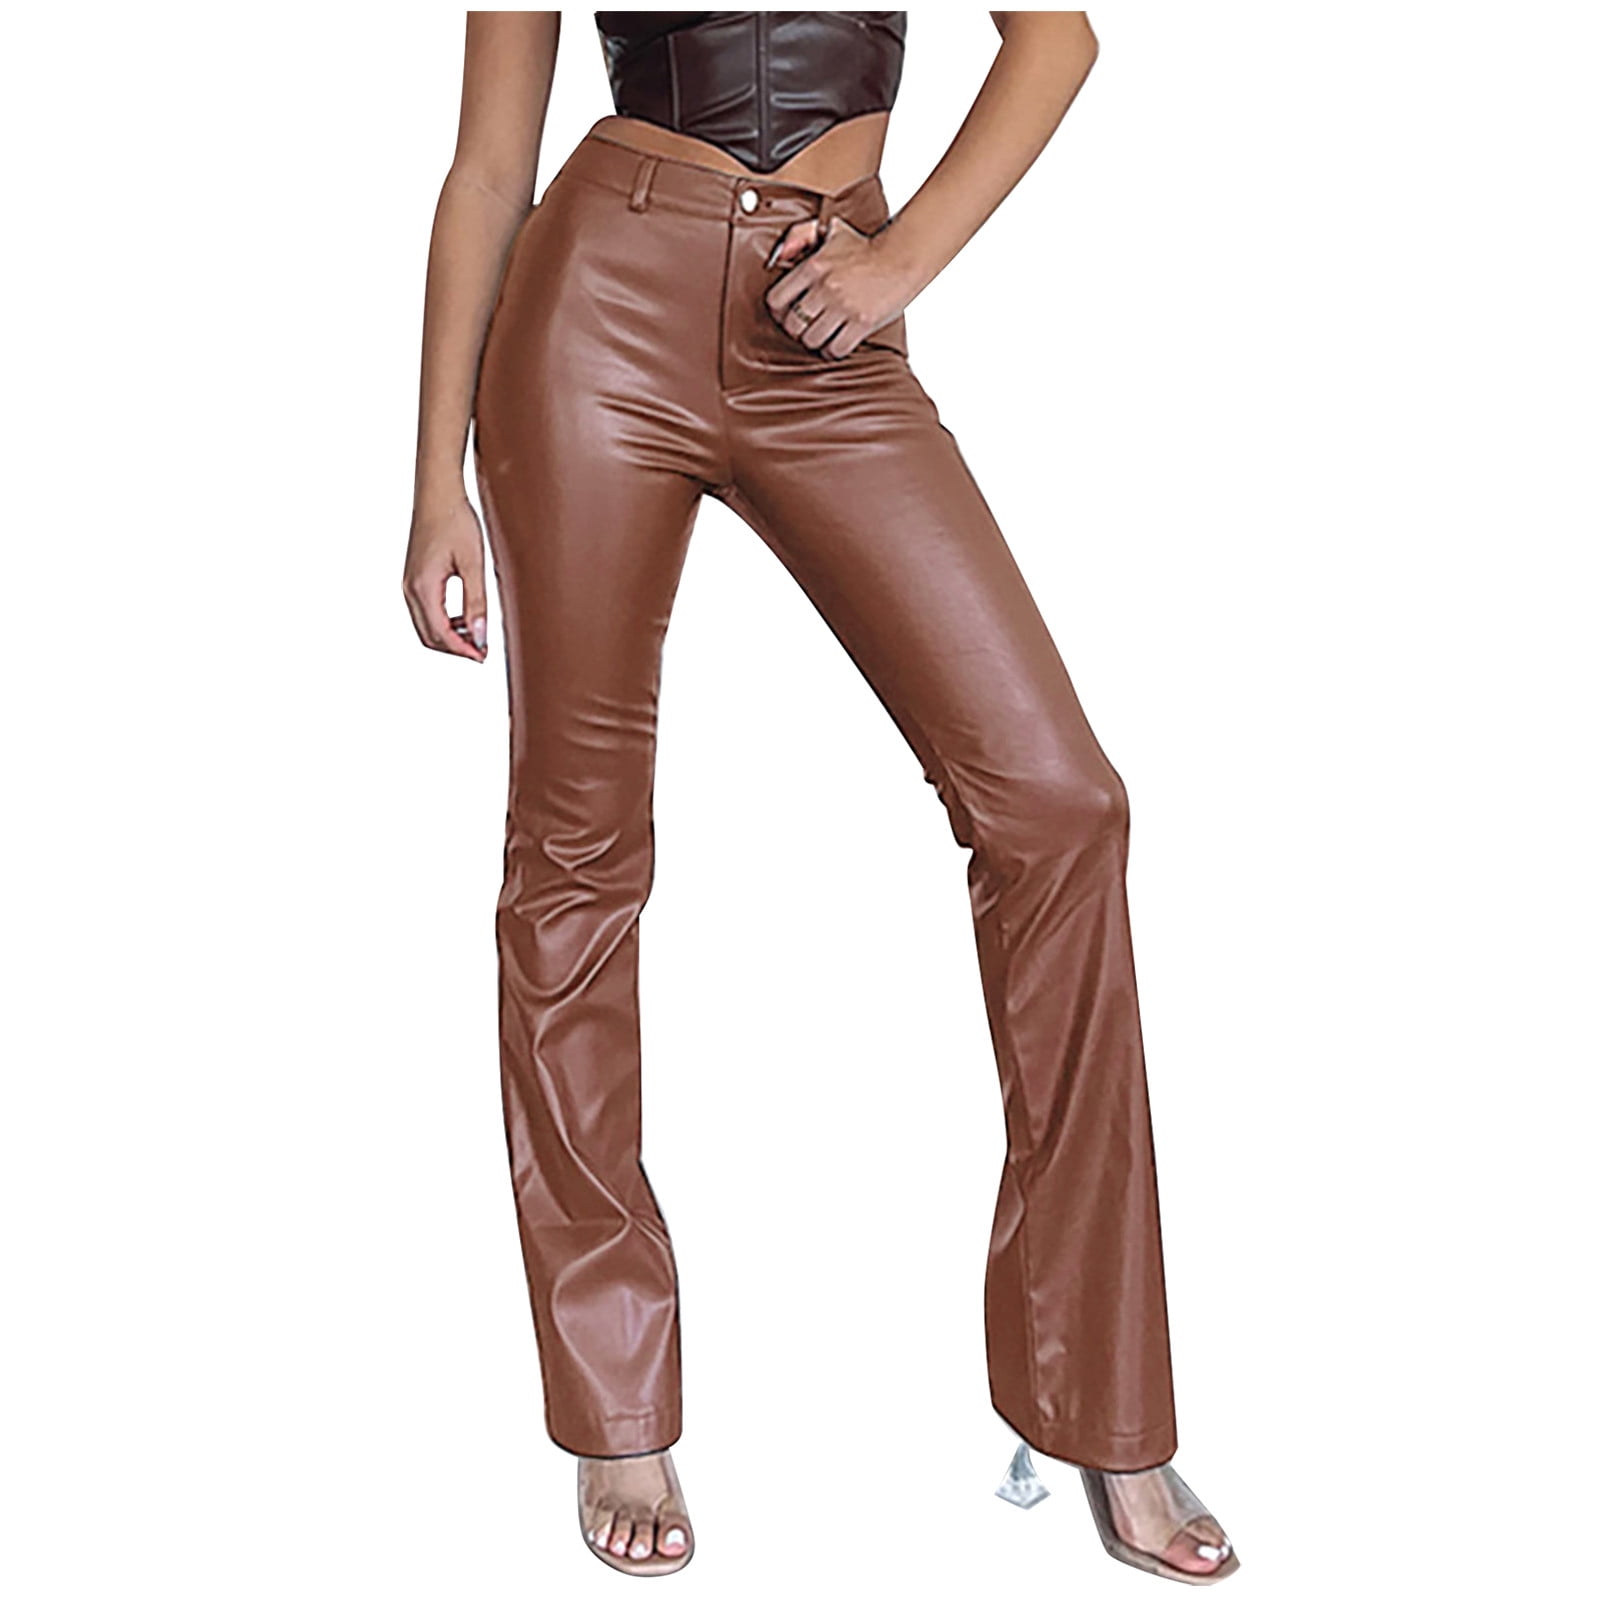 Melody Silver Leggings Fashion Womens Leather Pants Sale Casual